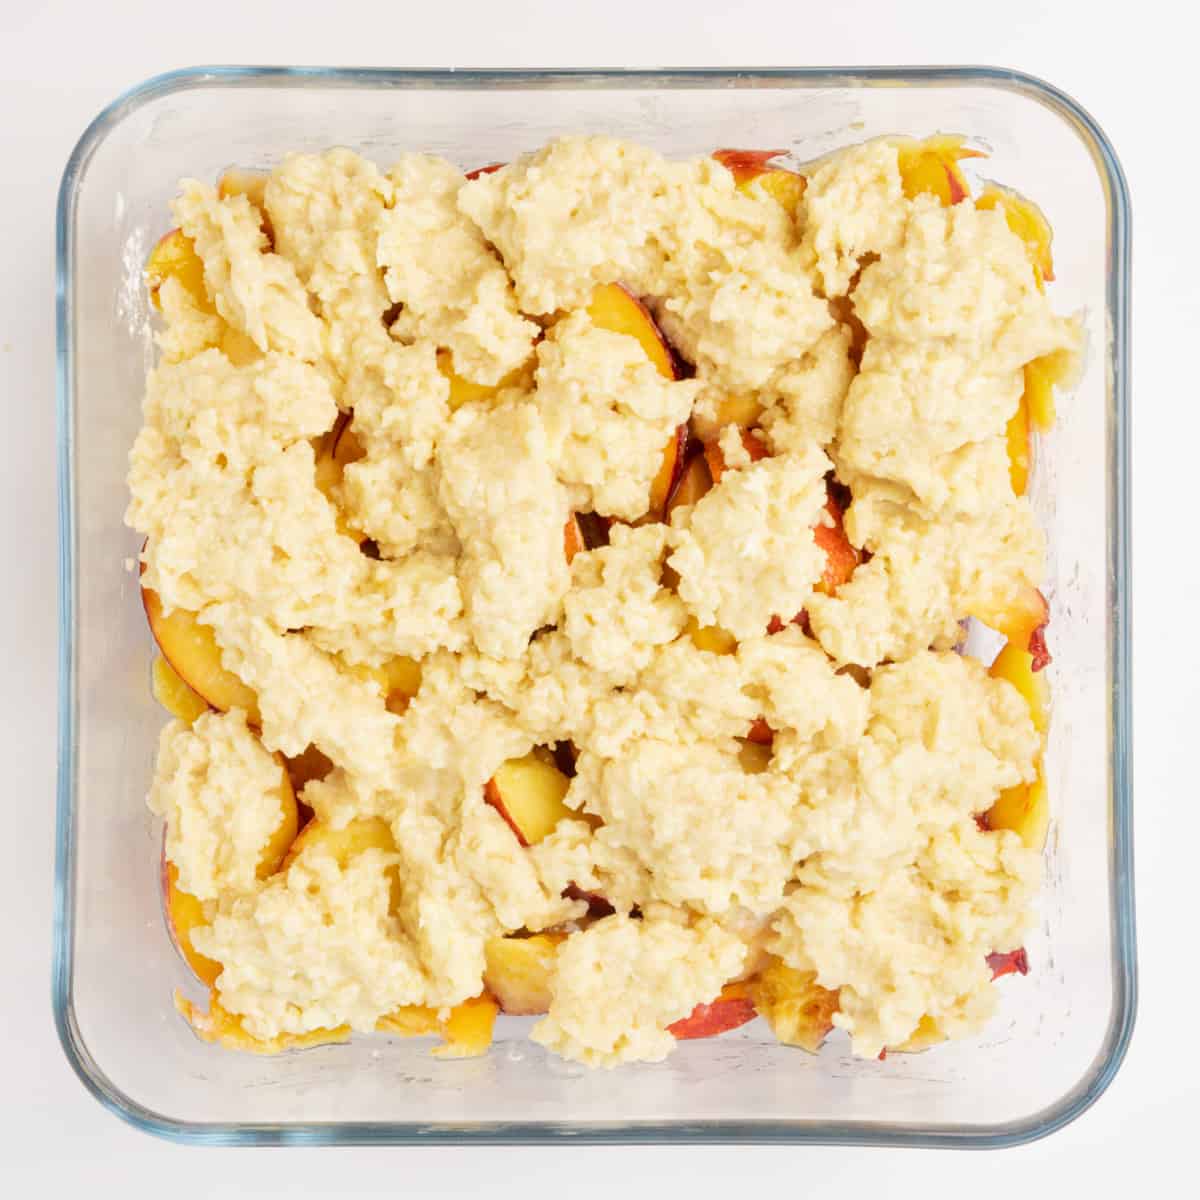 Pieces of cobbler topping spread on top of peaches in a baking dish.